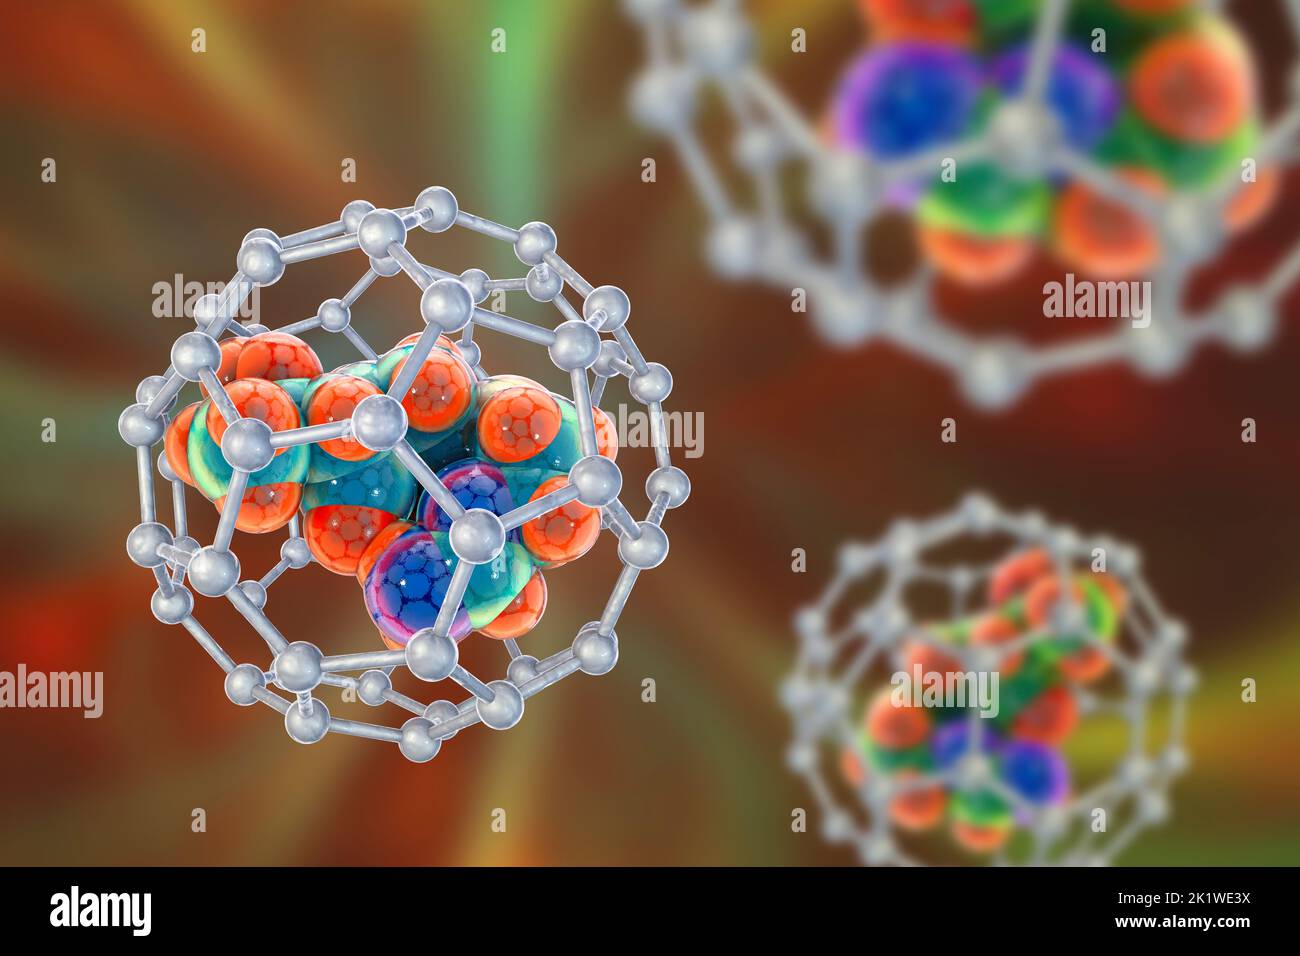 Nanoparticles in drug delivery, conceptual illustration Stock Photo